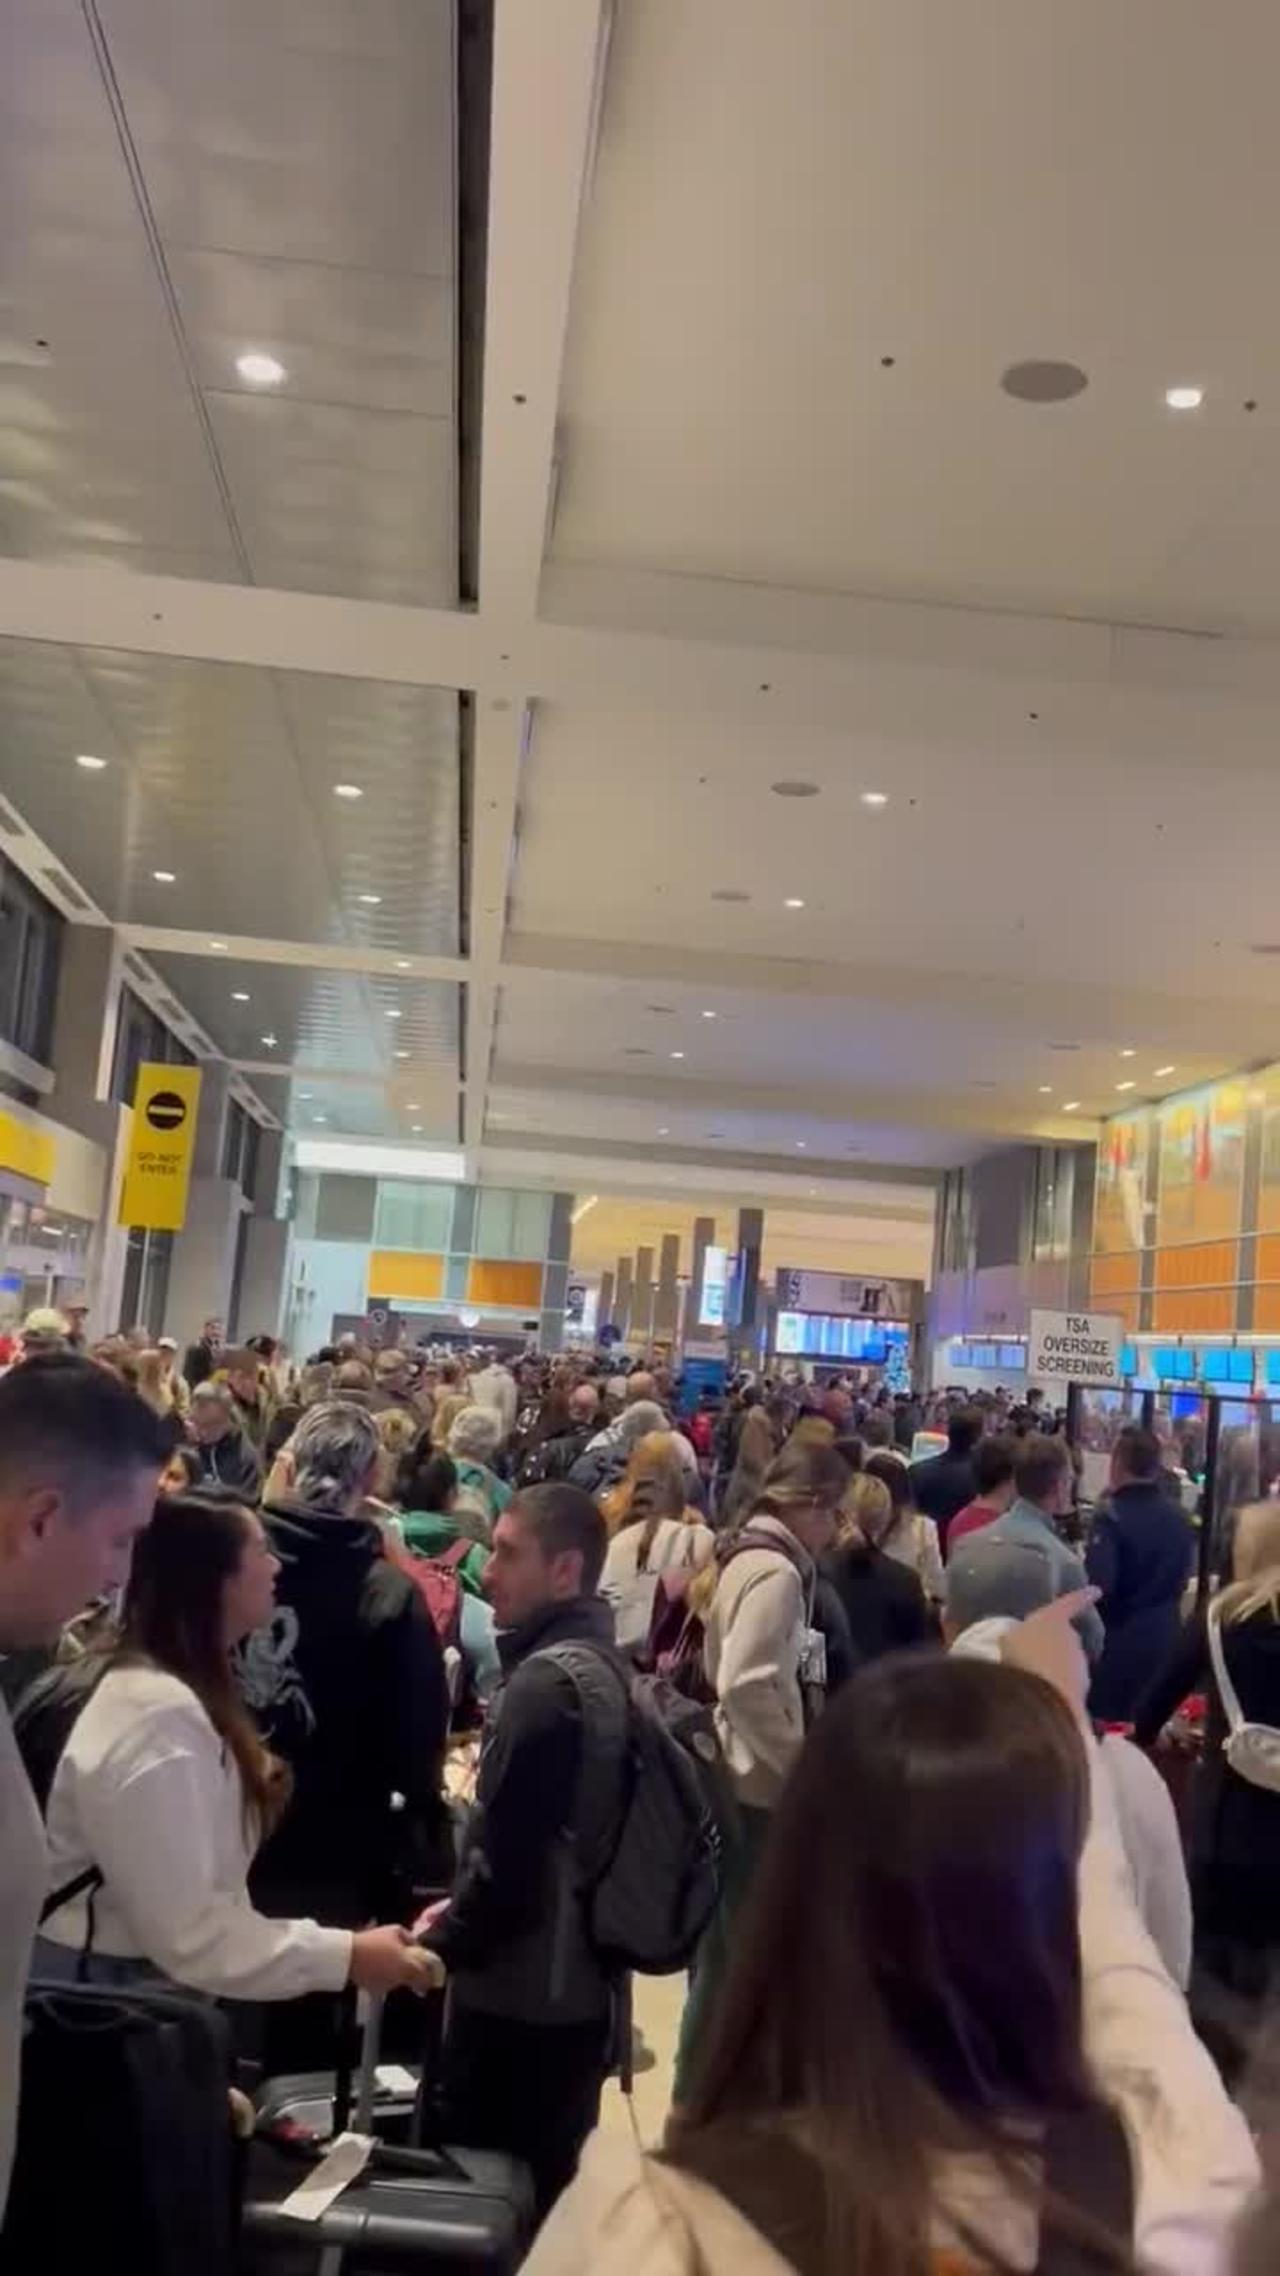 Airline cancellations disrupt Austin Airport travel as passengers wait hours